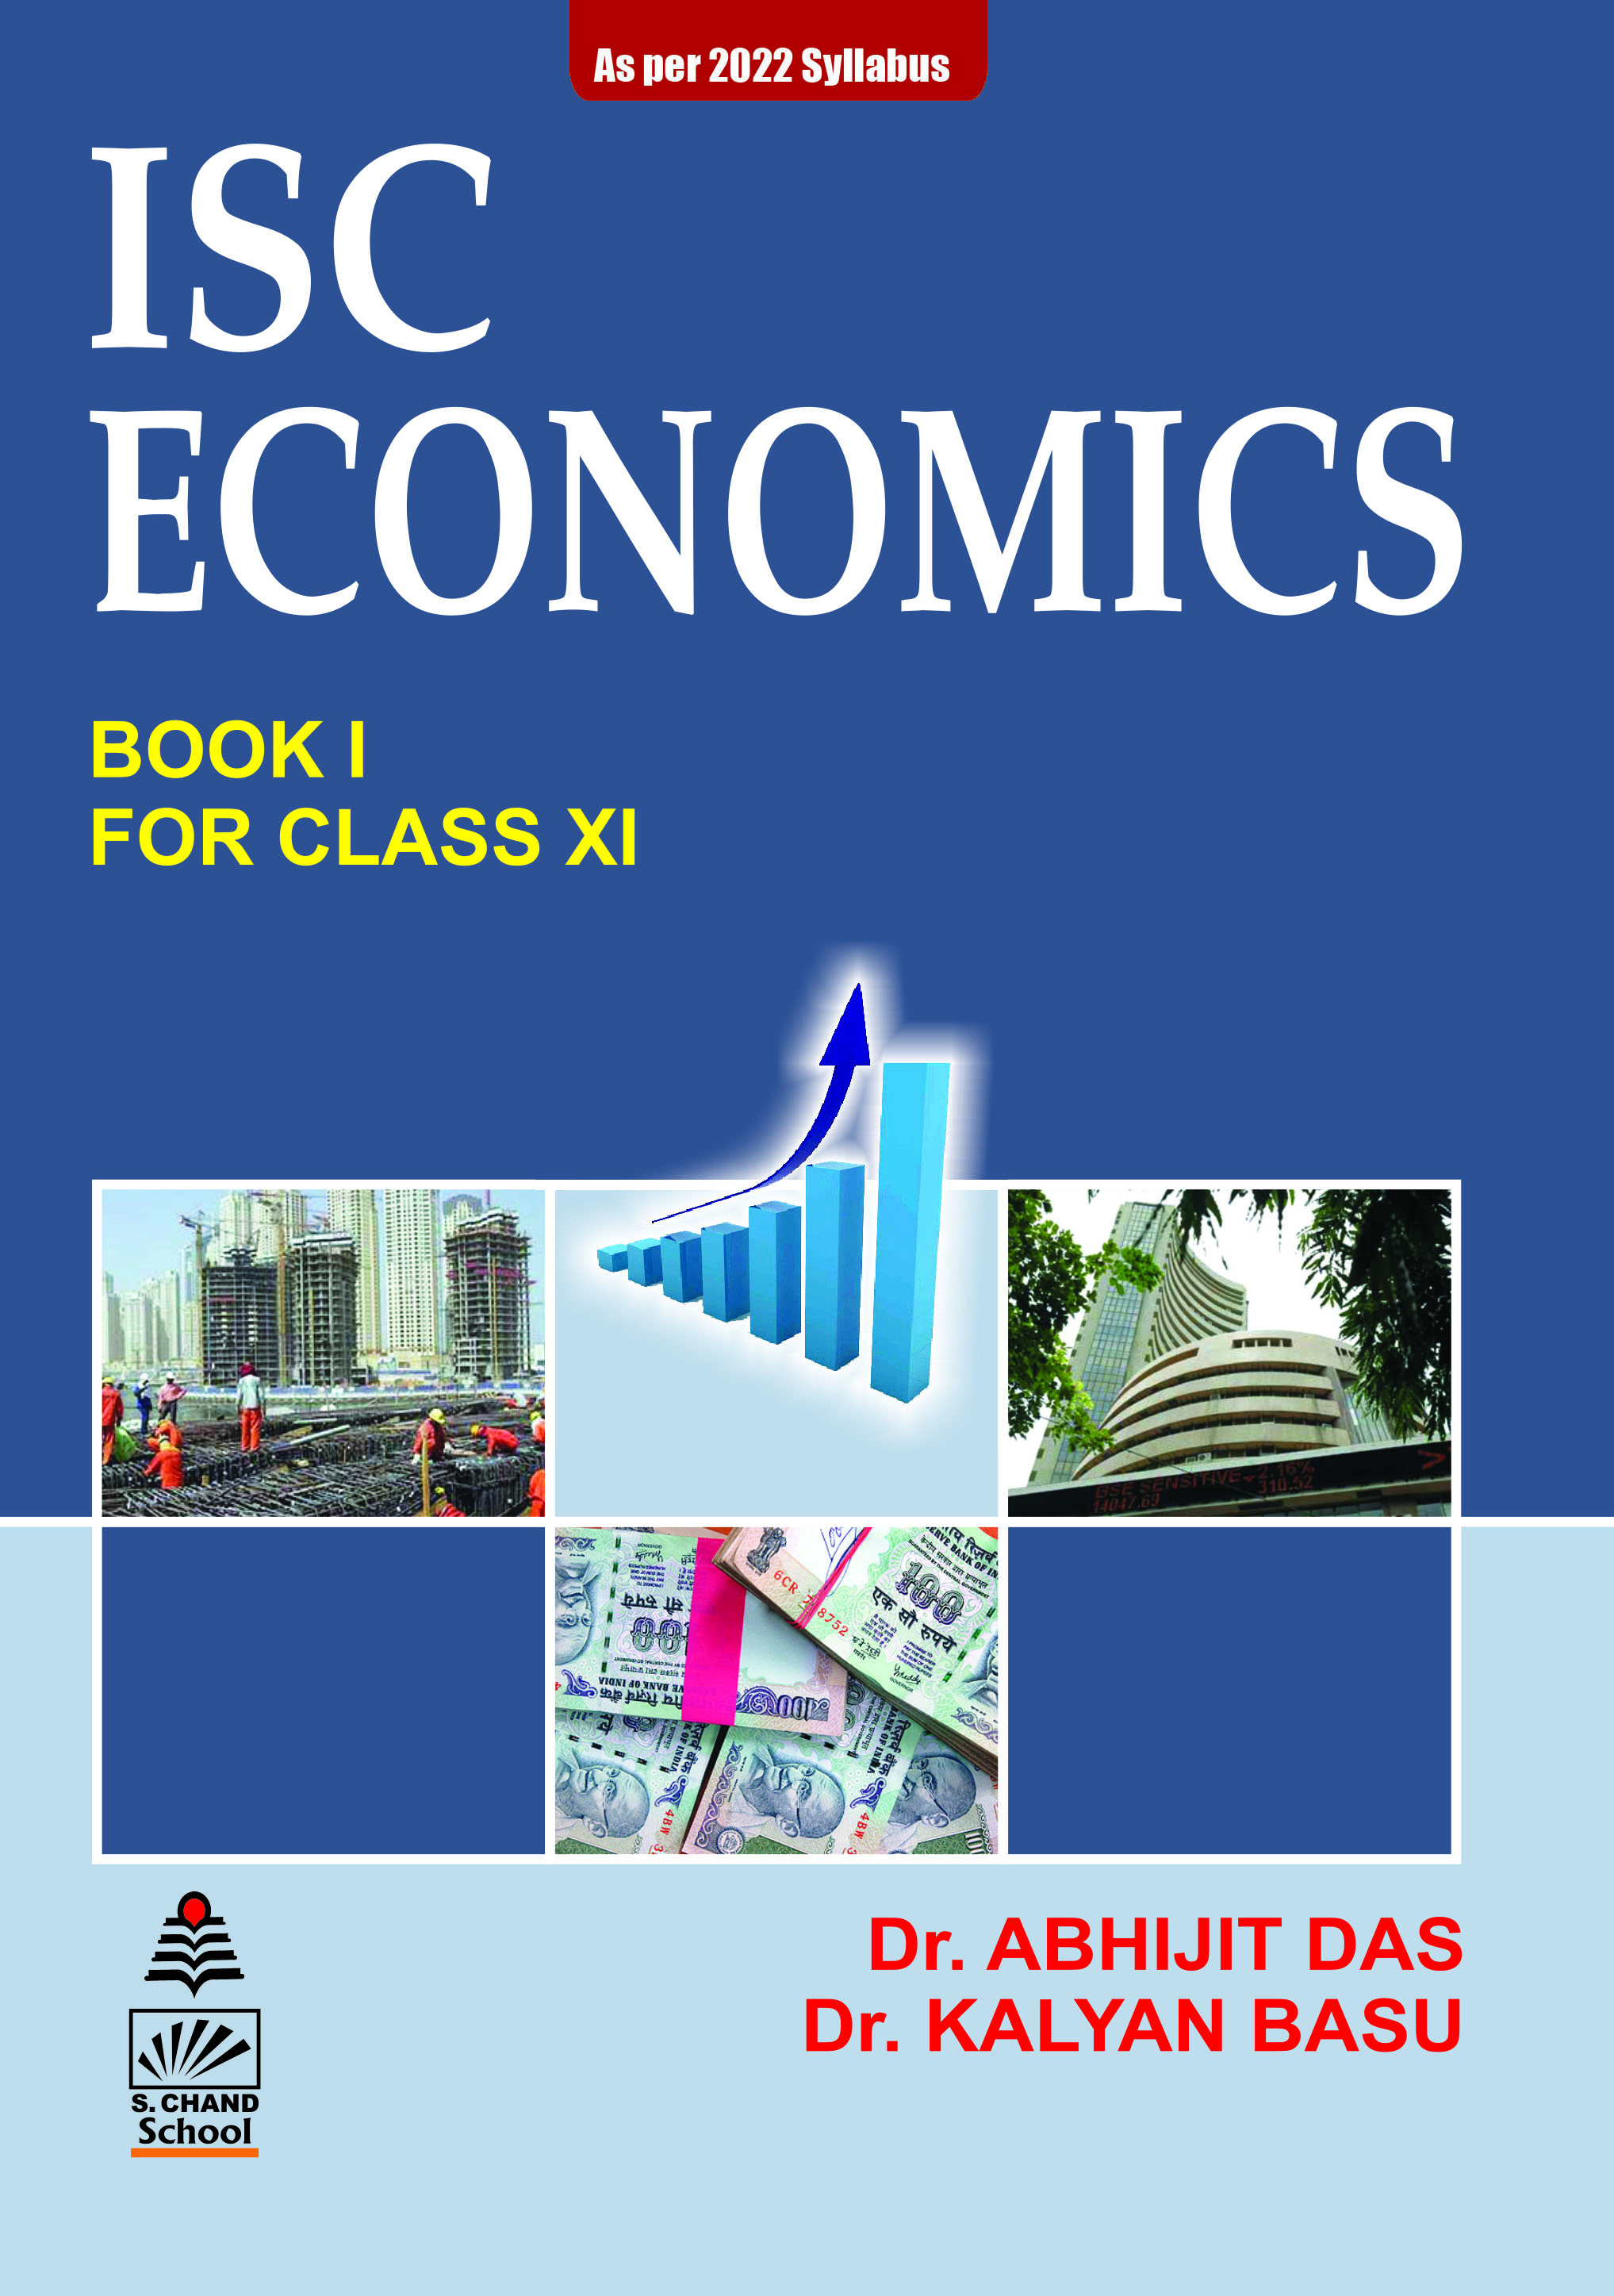 book review examples for class 11 isc